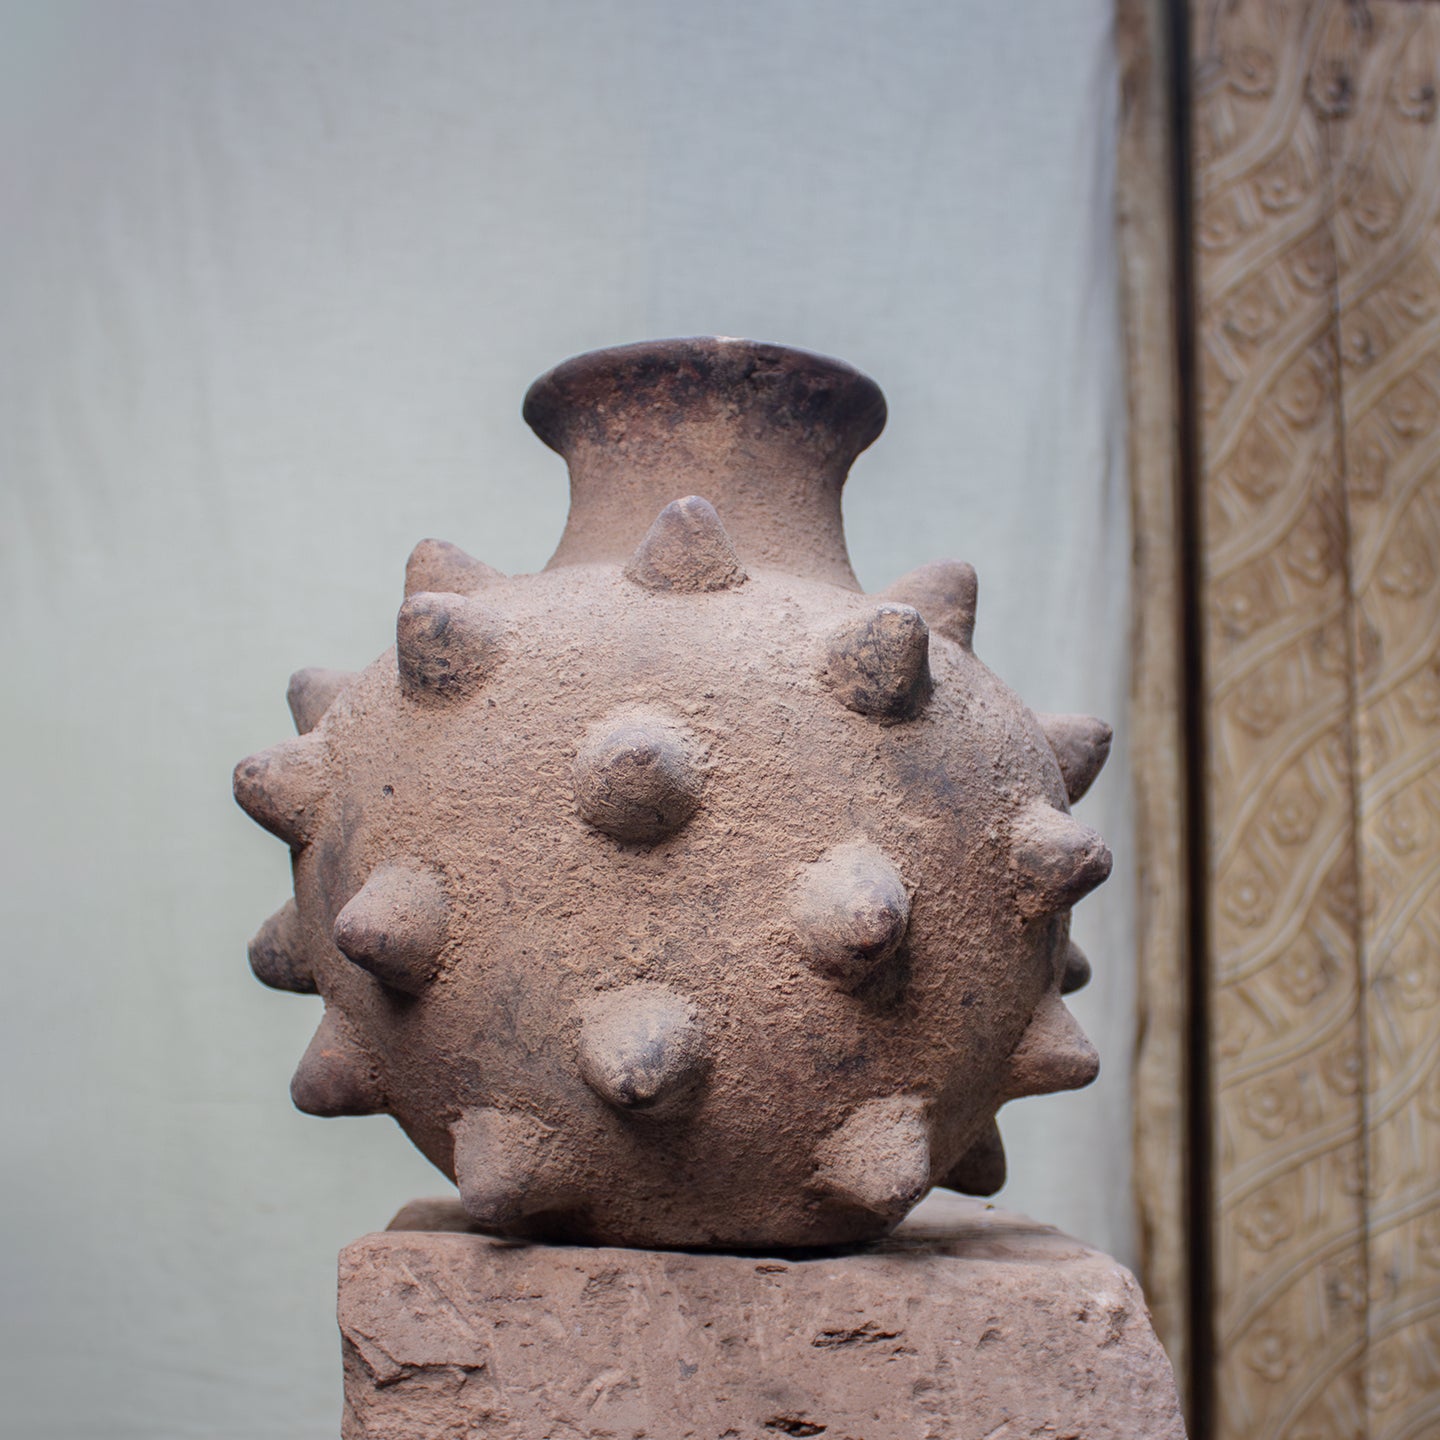 Terracotta vase from Mexico 